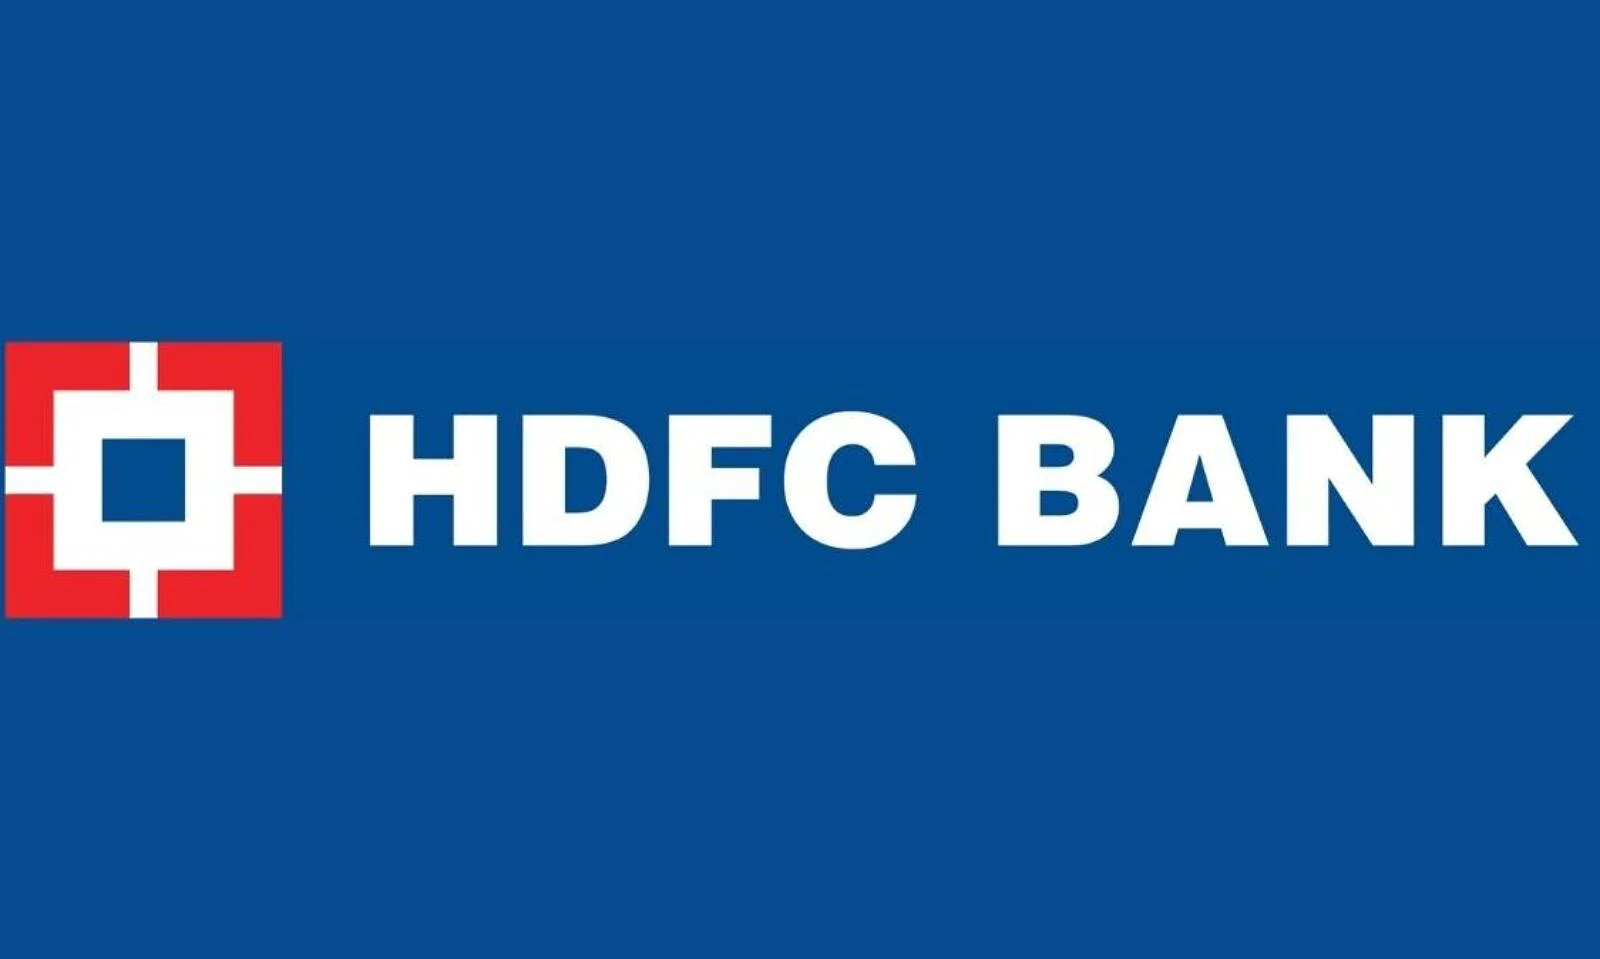 Overview And Ways To Bank With HDFC